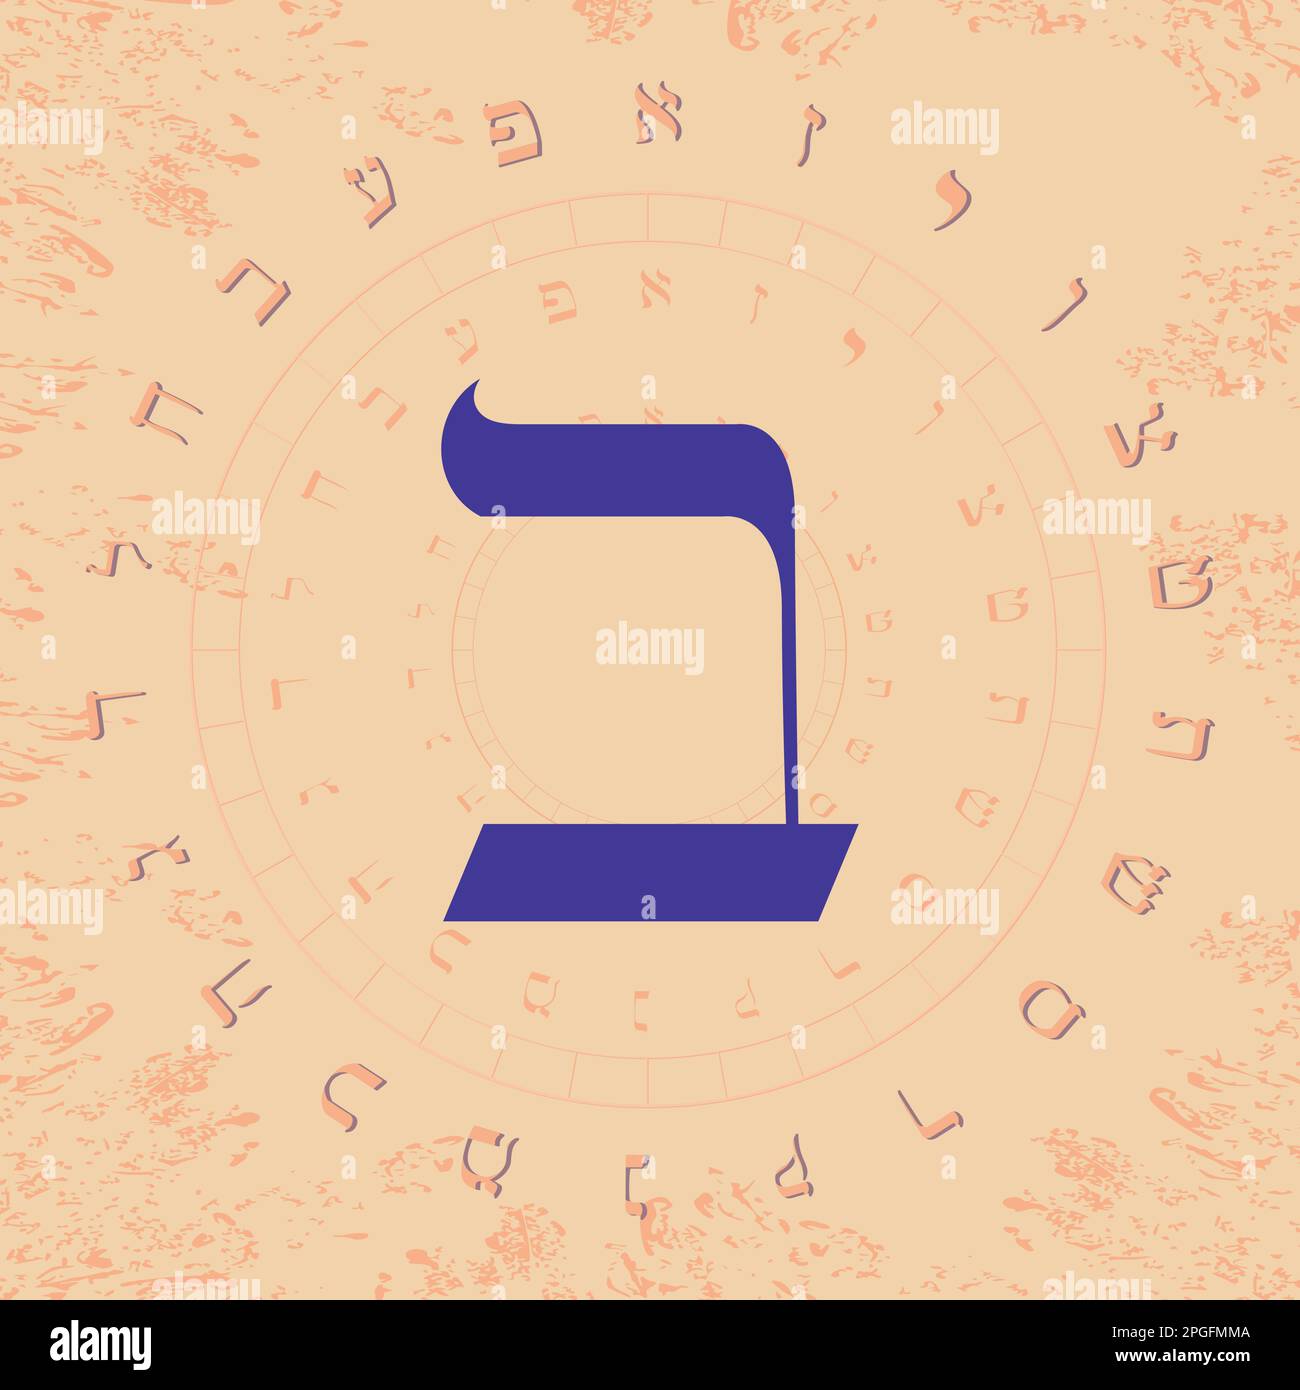 Vector illustration of the Hebrew alphabet in circular design. Hebrew letter called Beth large and blue. Stock Vector